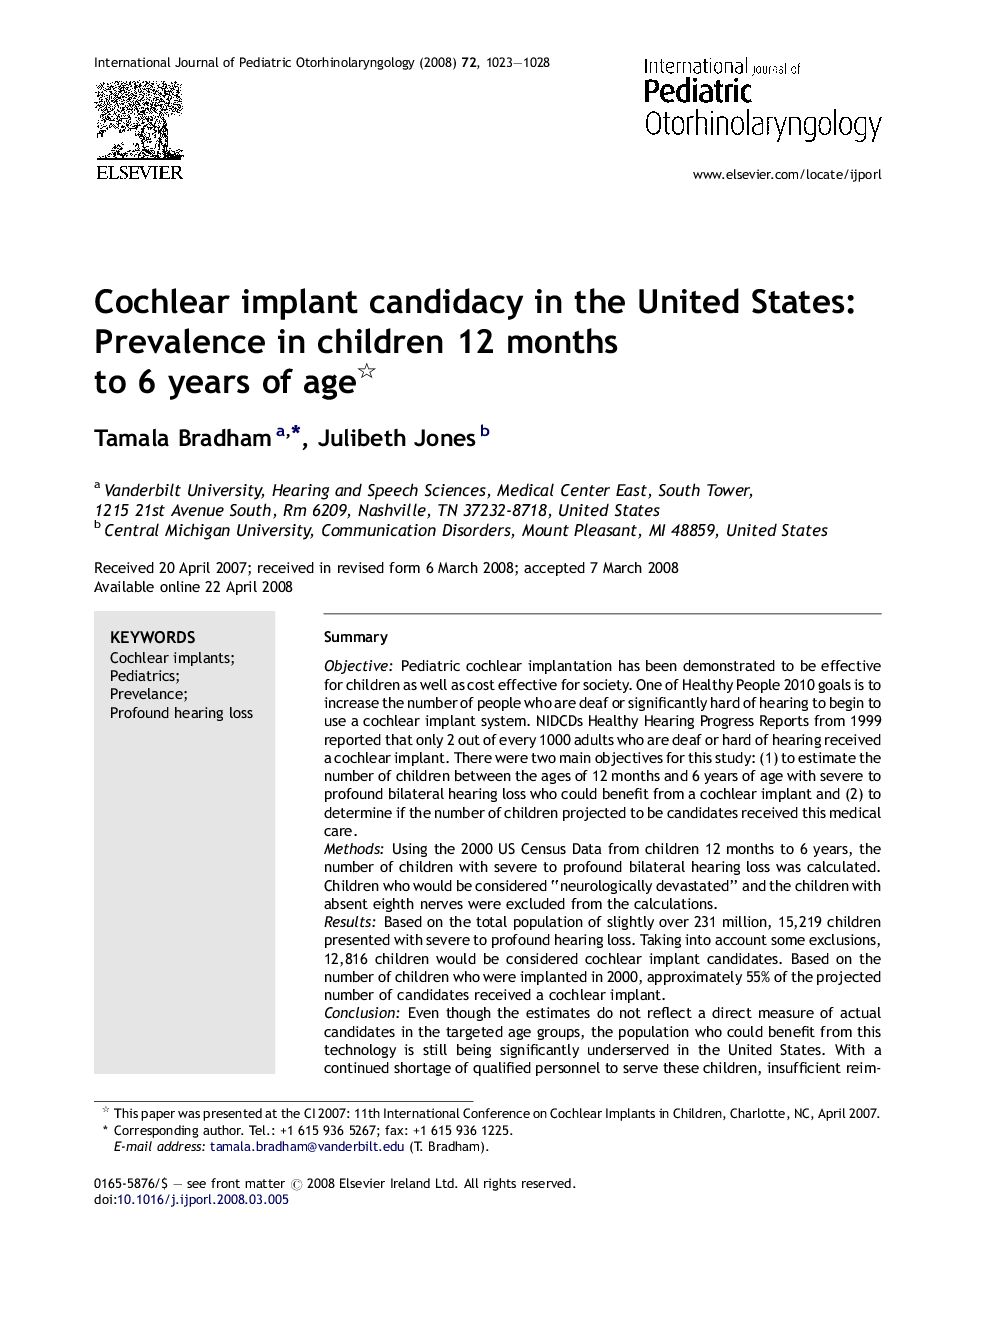 Cochlear implant candidacy in the United States: Prevalence in children 12 months to 6 years of age 